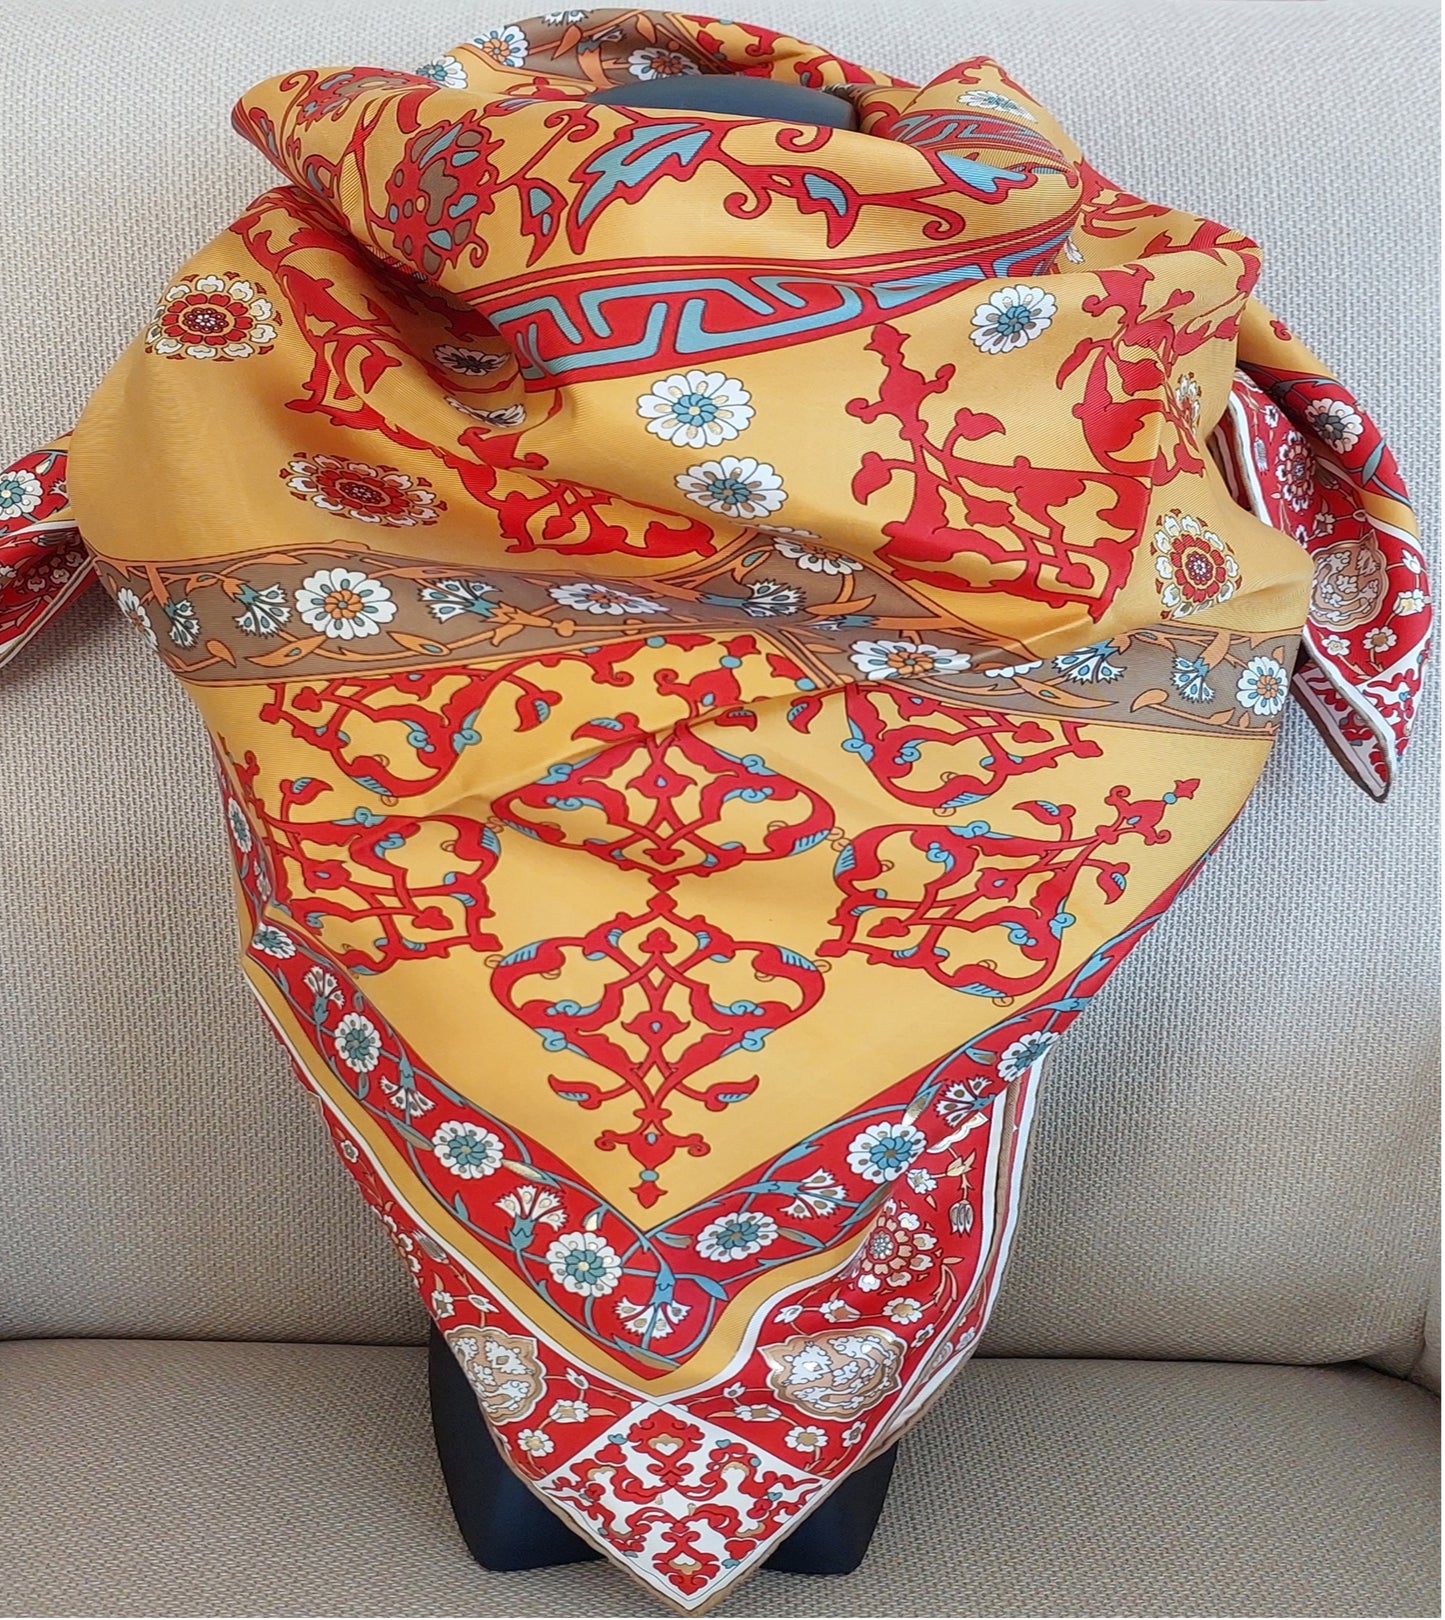 Woman 100% Silk Scarf Geometric design Orange Red Gold Colors Hand rolled Great Gift for Her in a box